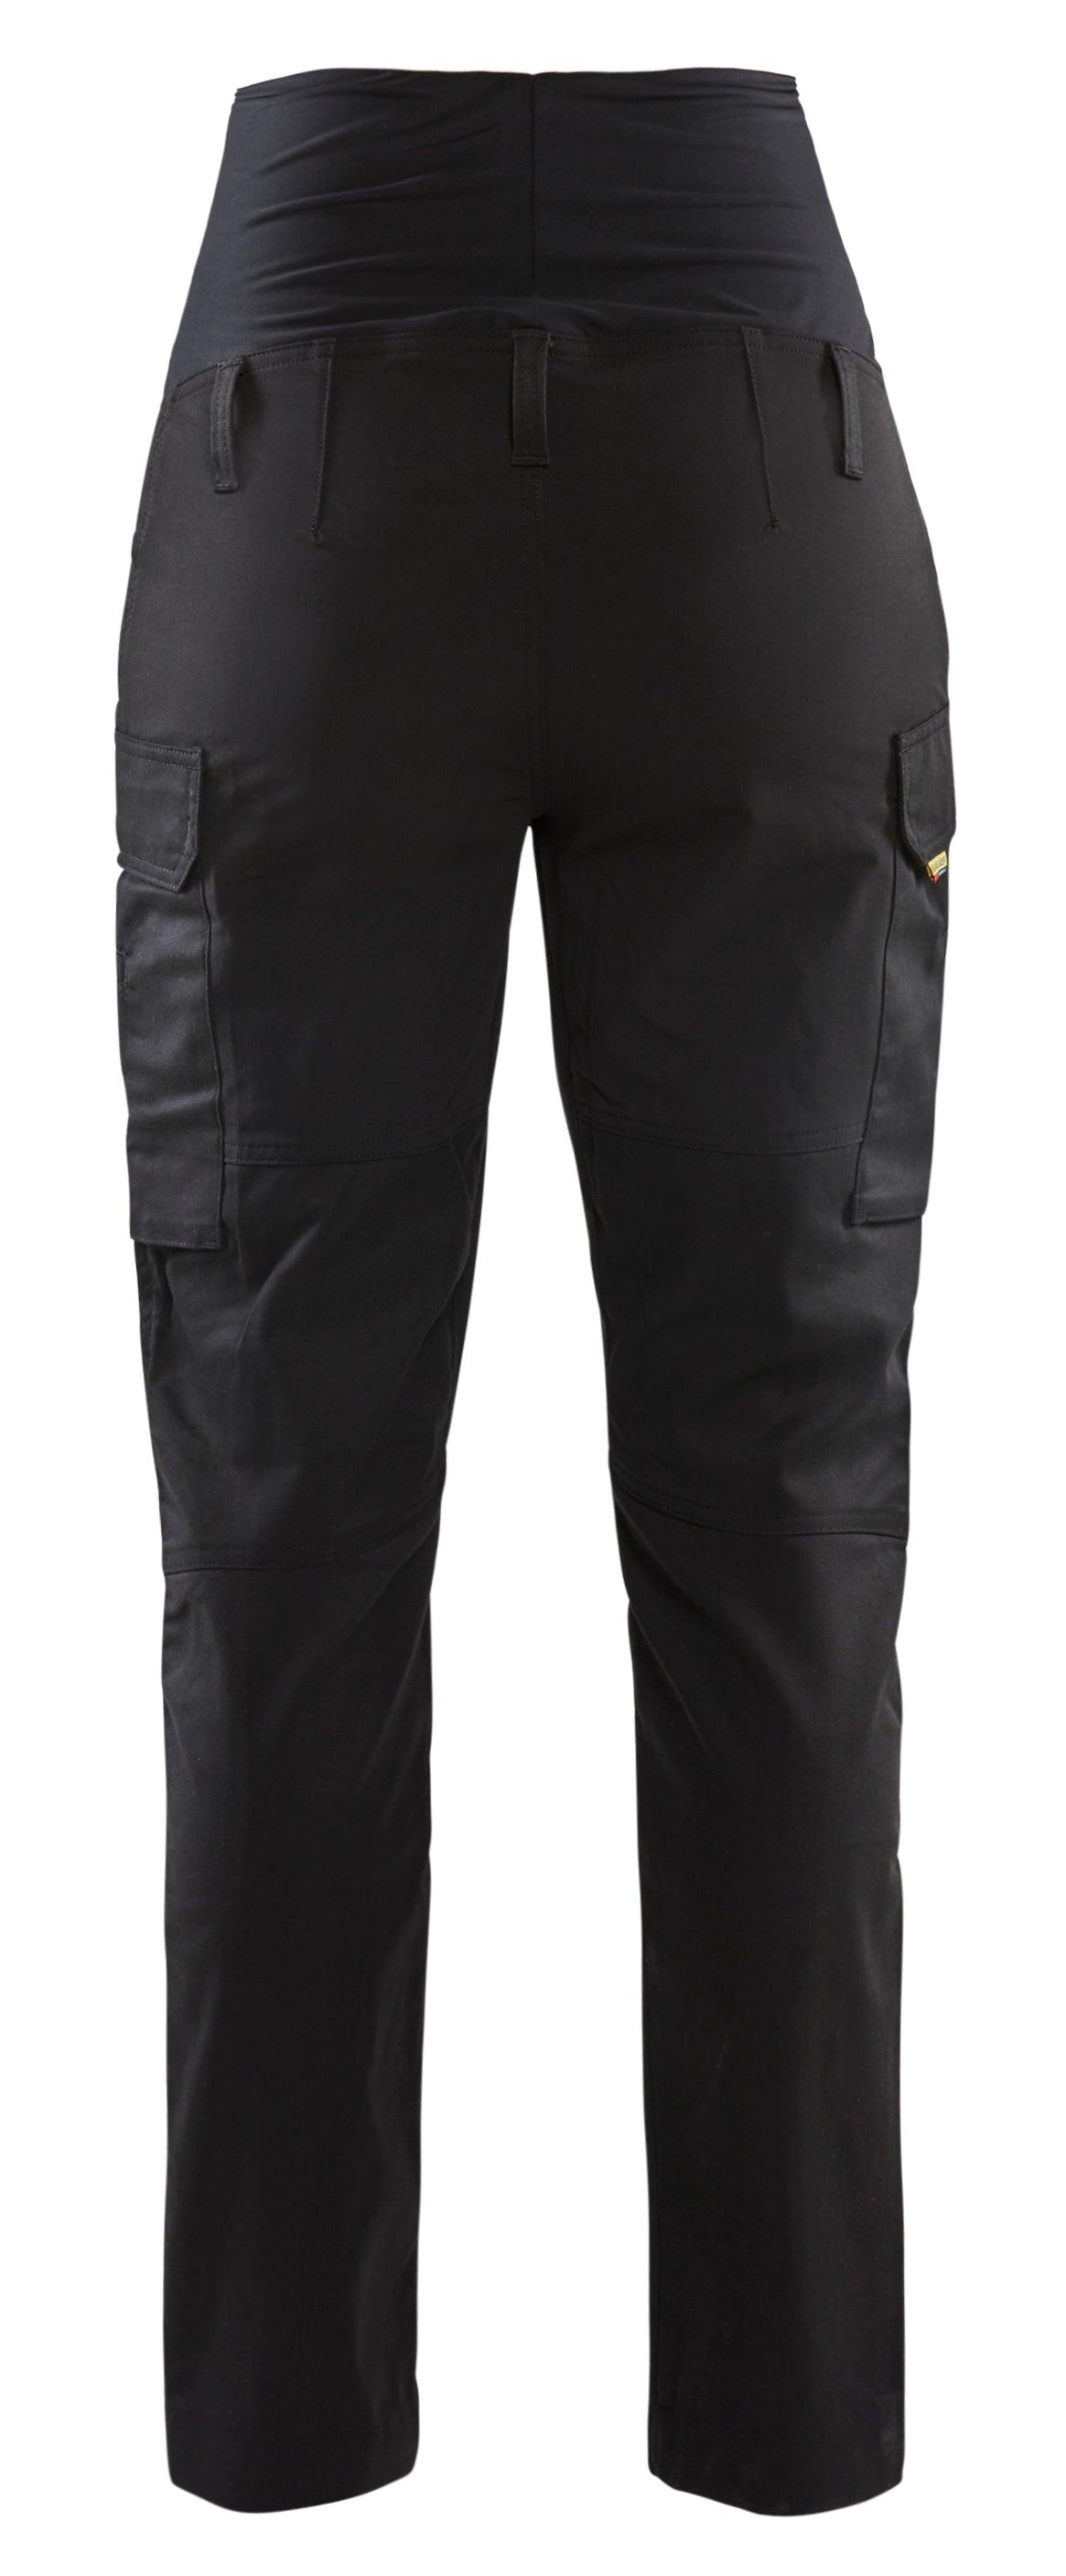 Blaklader 1449 Service Stretch Short work trousers only £ 71.73